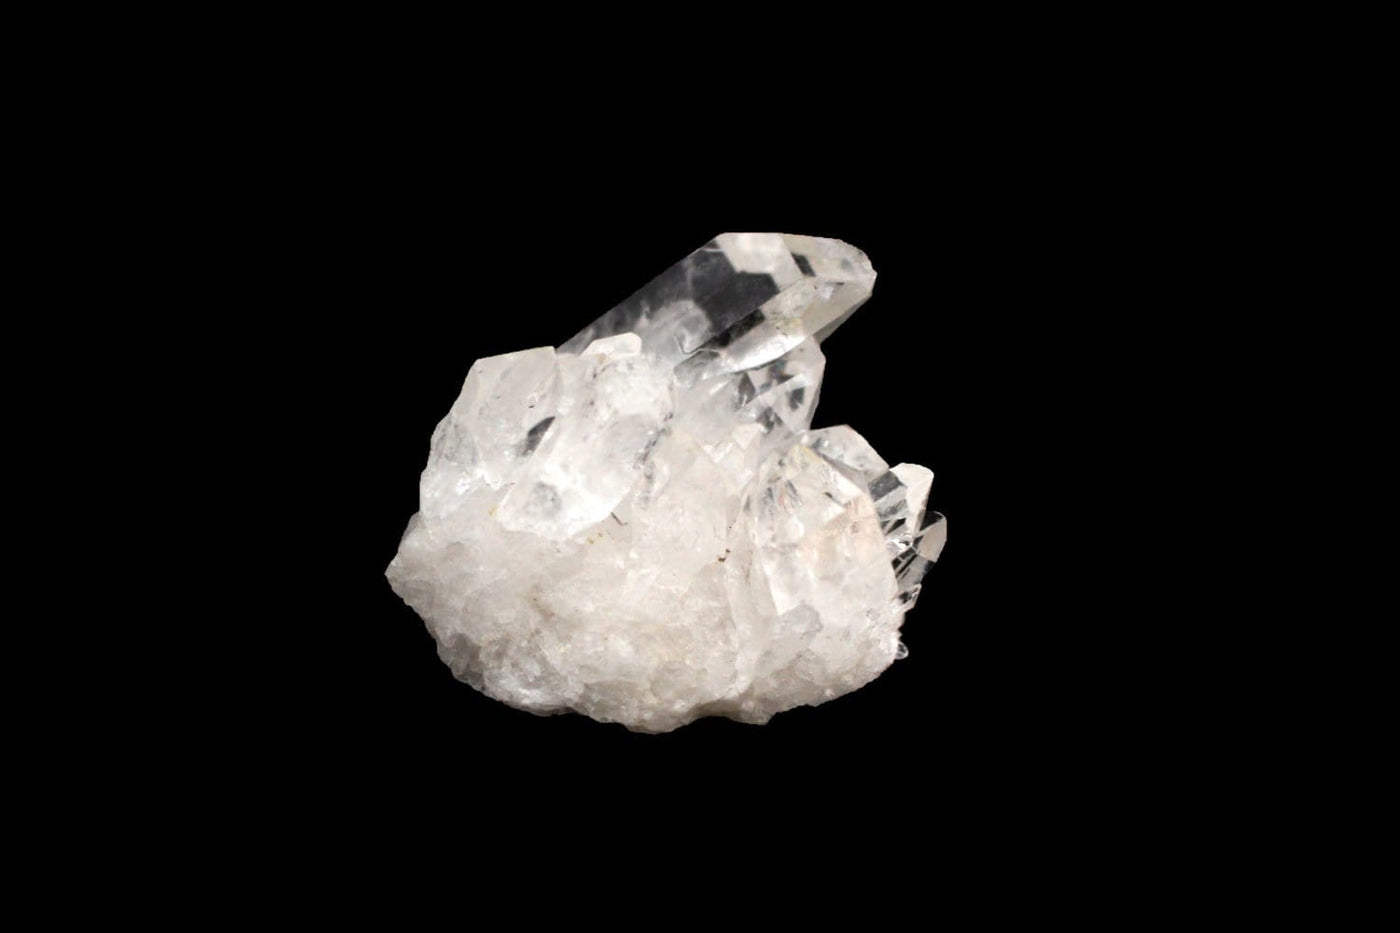 Raw Crystal Cluster on black background